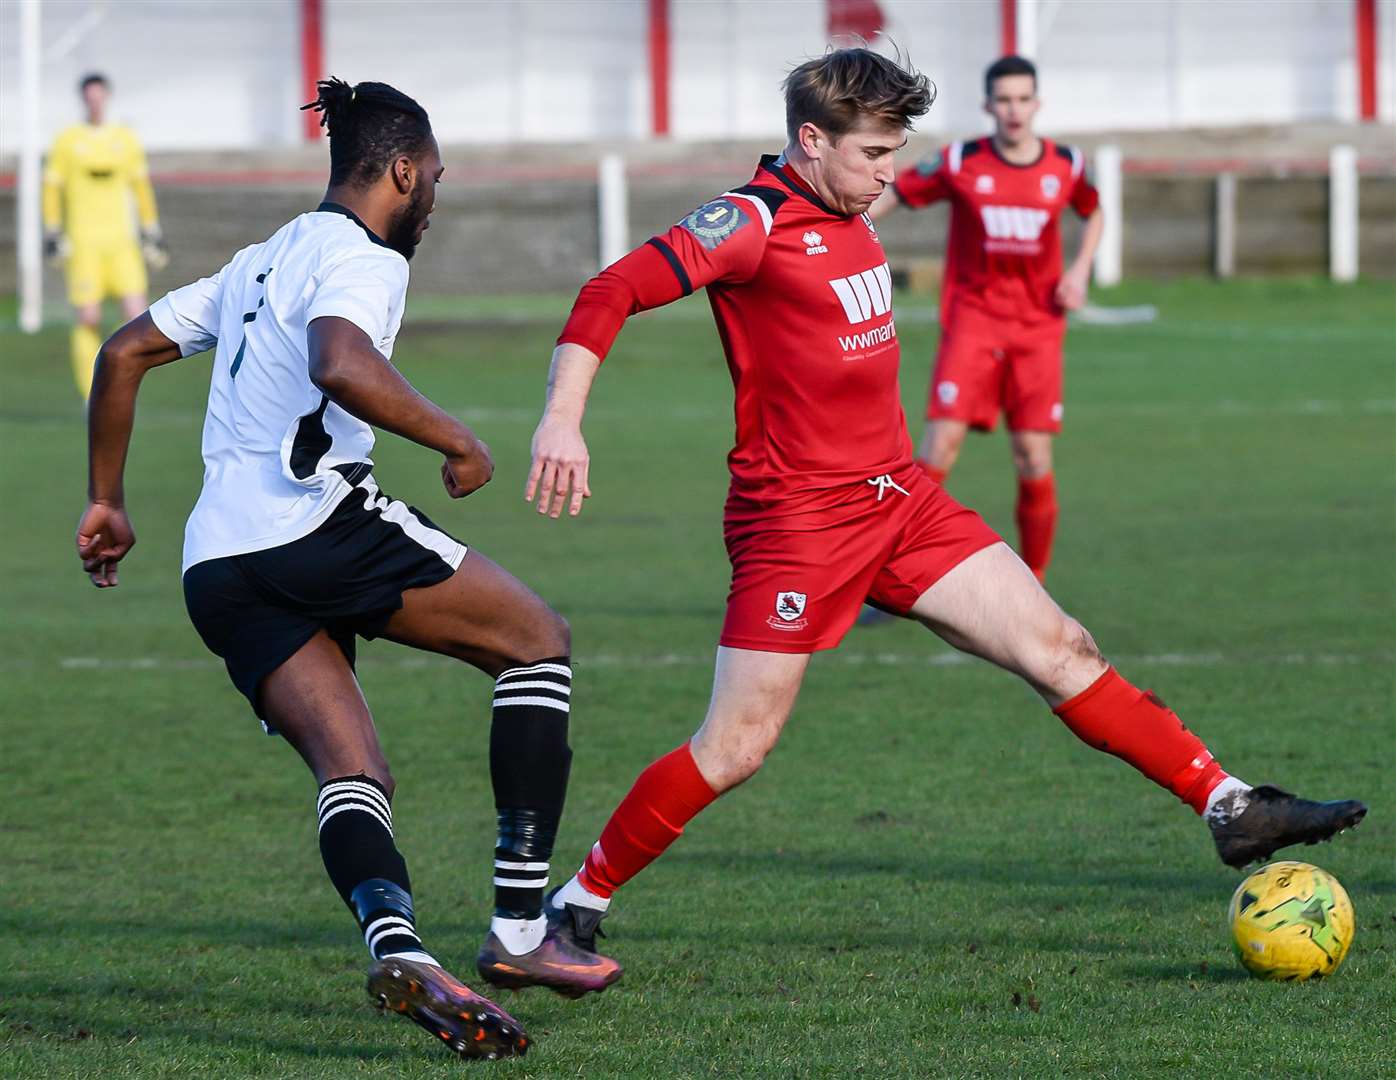 NHS workers can watch Ramsgate, including James Morrish pictured in action against Faversham, for free this season. Picture: Alan Langley (42305508)